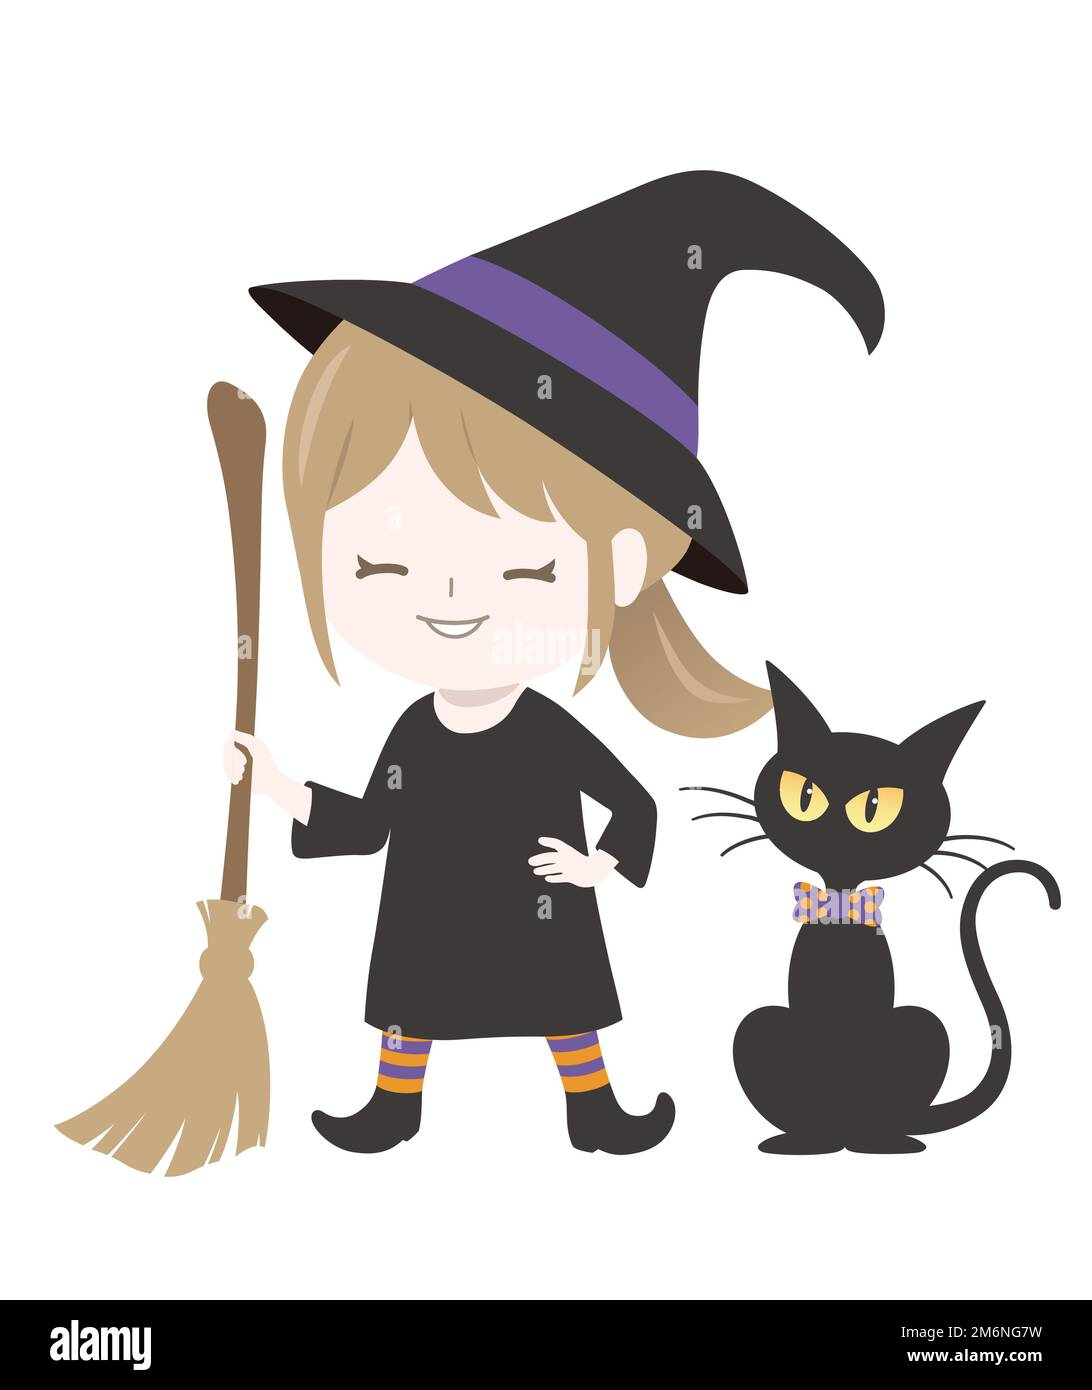 Cute Witch With A Black Cat Holding Her Magic Brooms Isolated On A White Background. Vector Halloween Illustration. Stock Vector